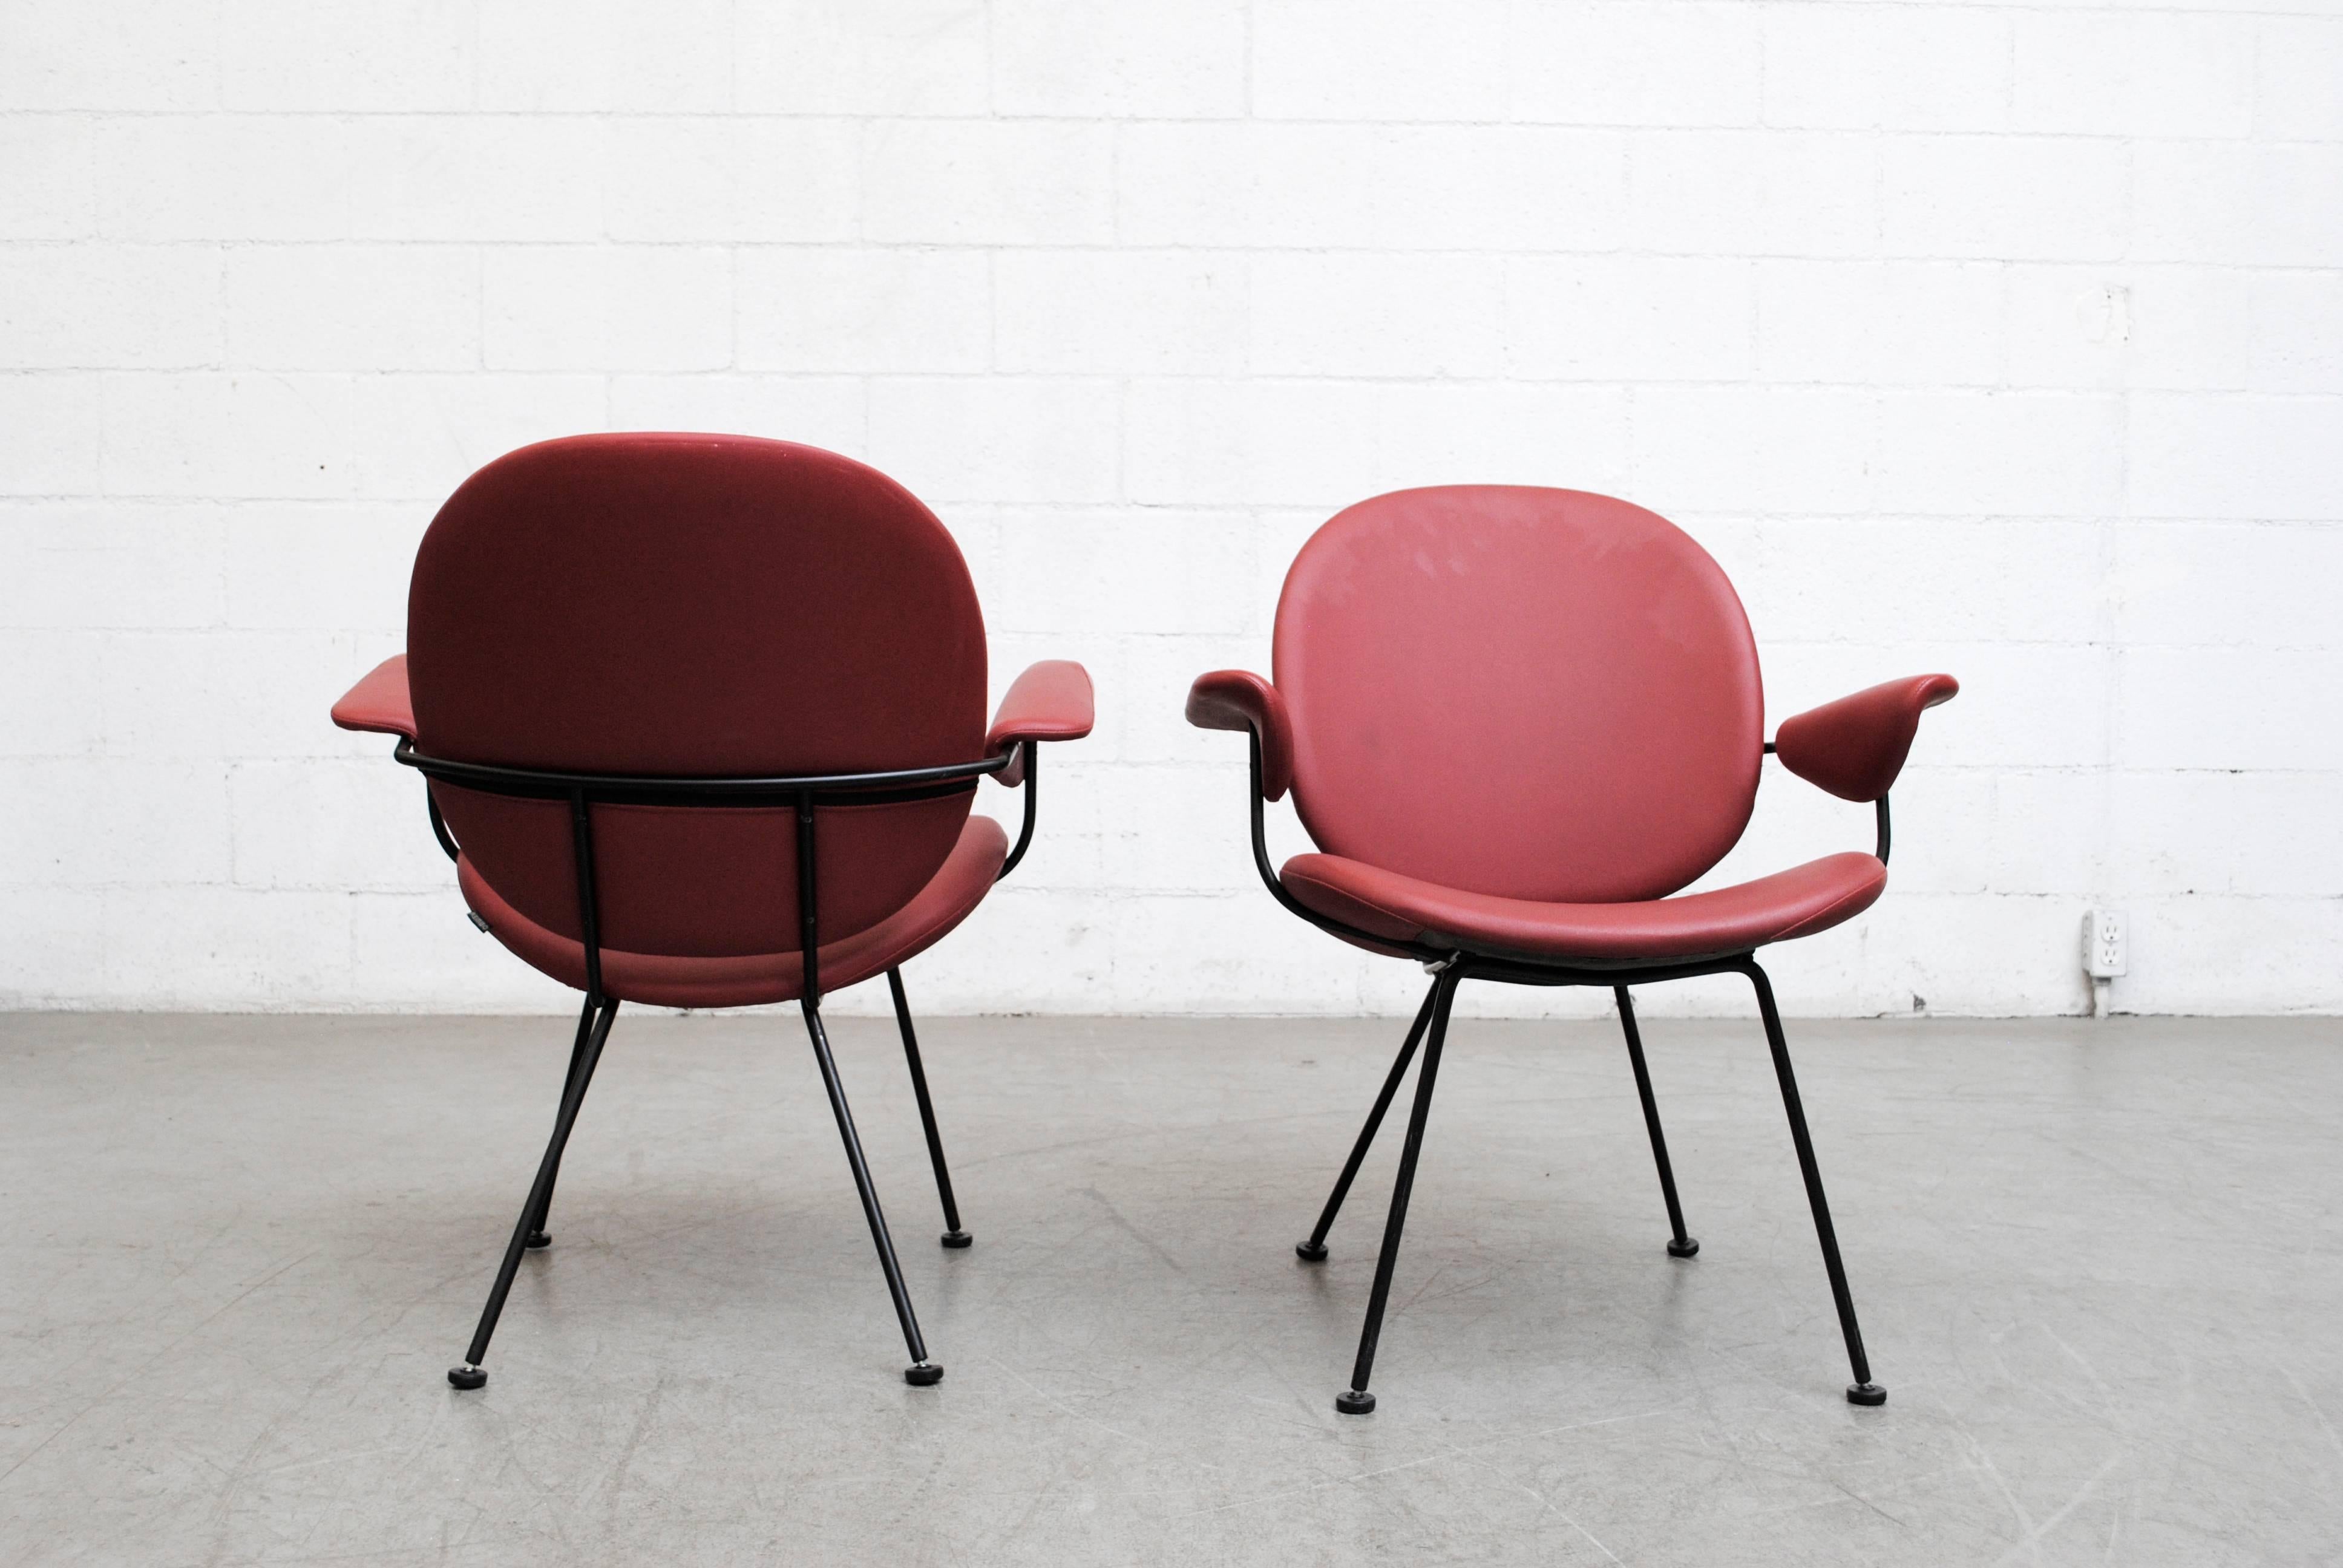 Set of two armchairs by Kembo (Attributed to Wm. Rietveld). Original dark red upholstery with Kembo Tag. Black enameled metal wire frames and original feet.